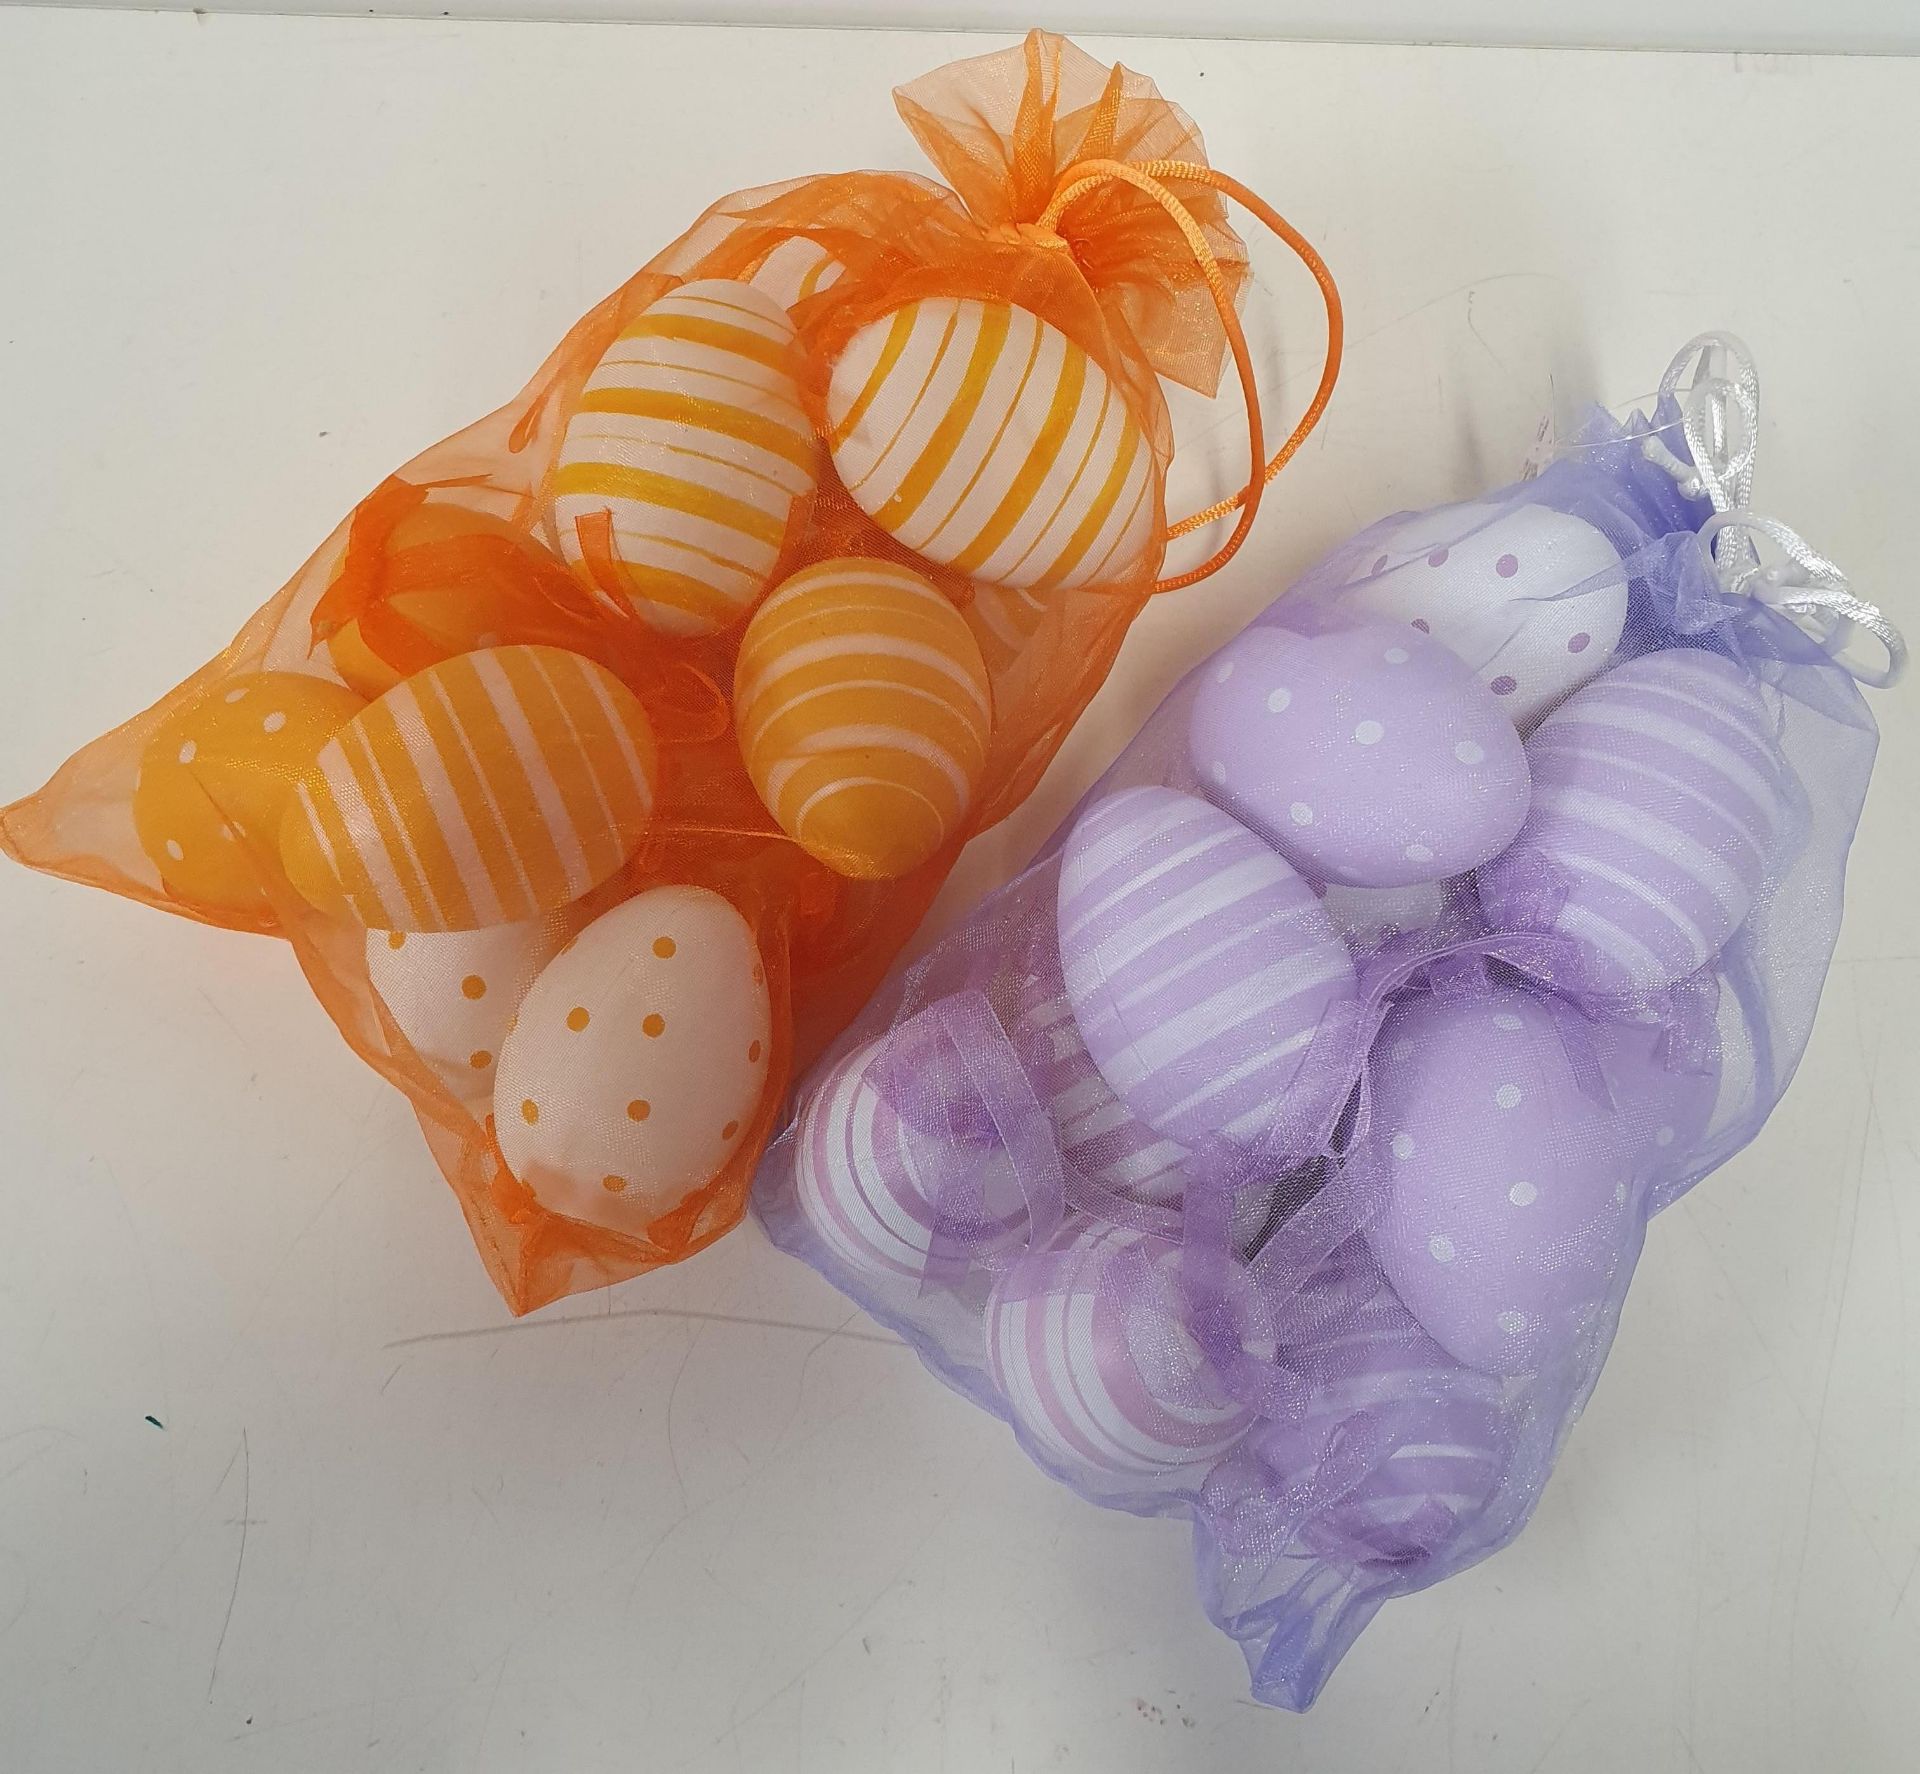 9 x 12 Decorative Hanging Easter Eggs in Irridescent Voile Gift Bag